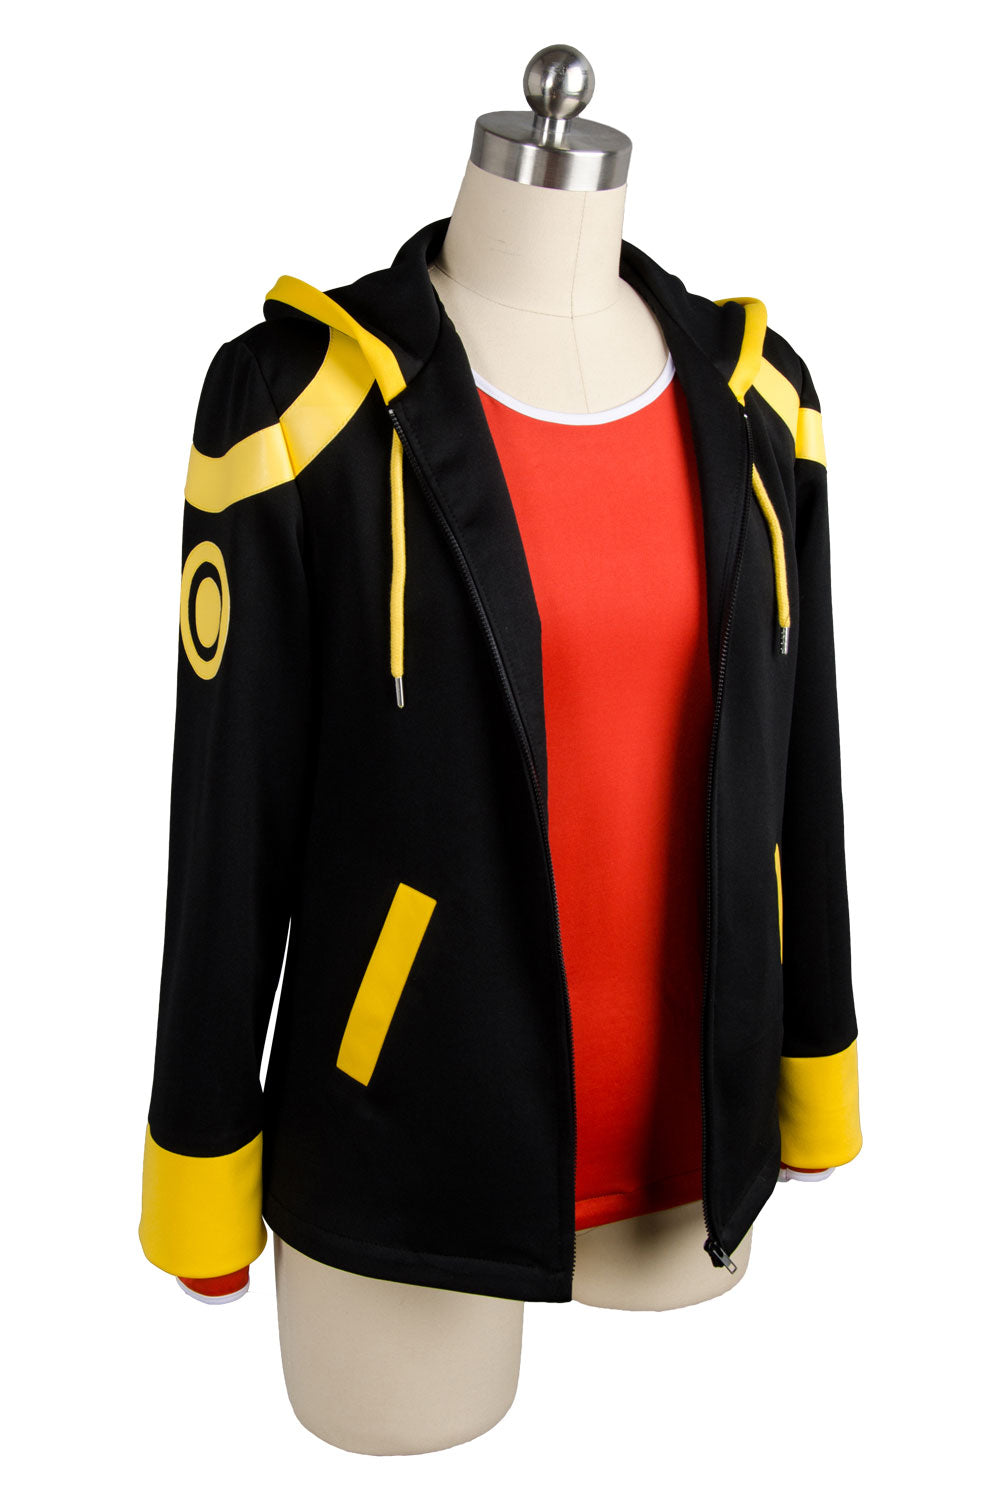 Mystic Messenger 707 EXTREME Saeyoung/Luciel Choi 7 Outfit Cosplay Costume